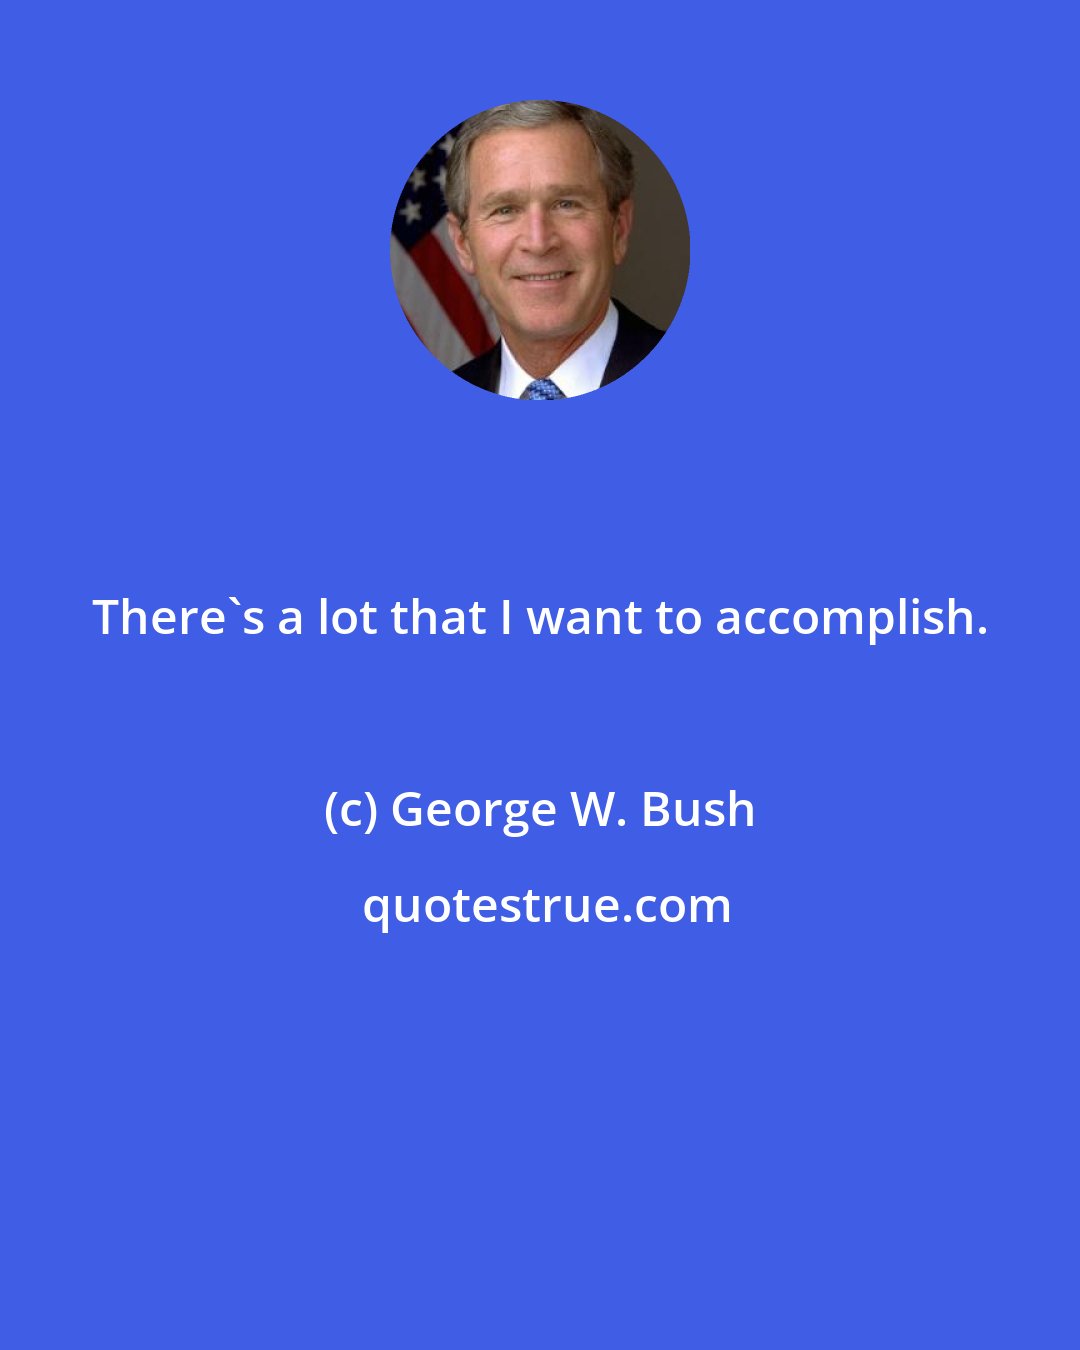 George W. Bush: There's a lot that I want to accomplish.